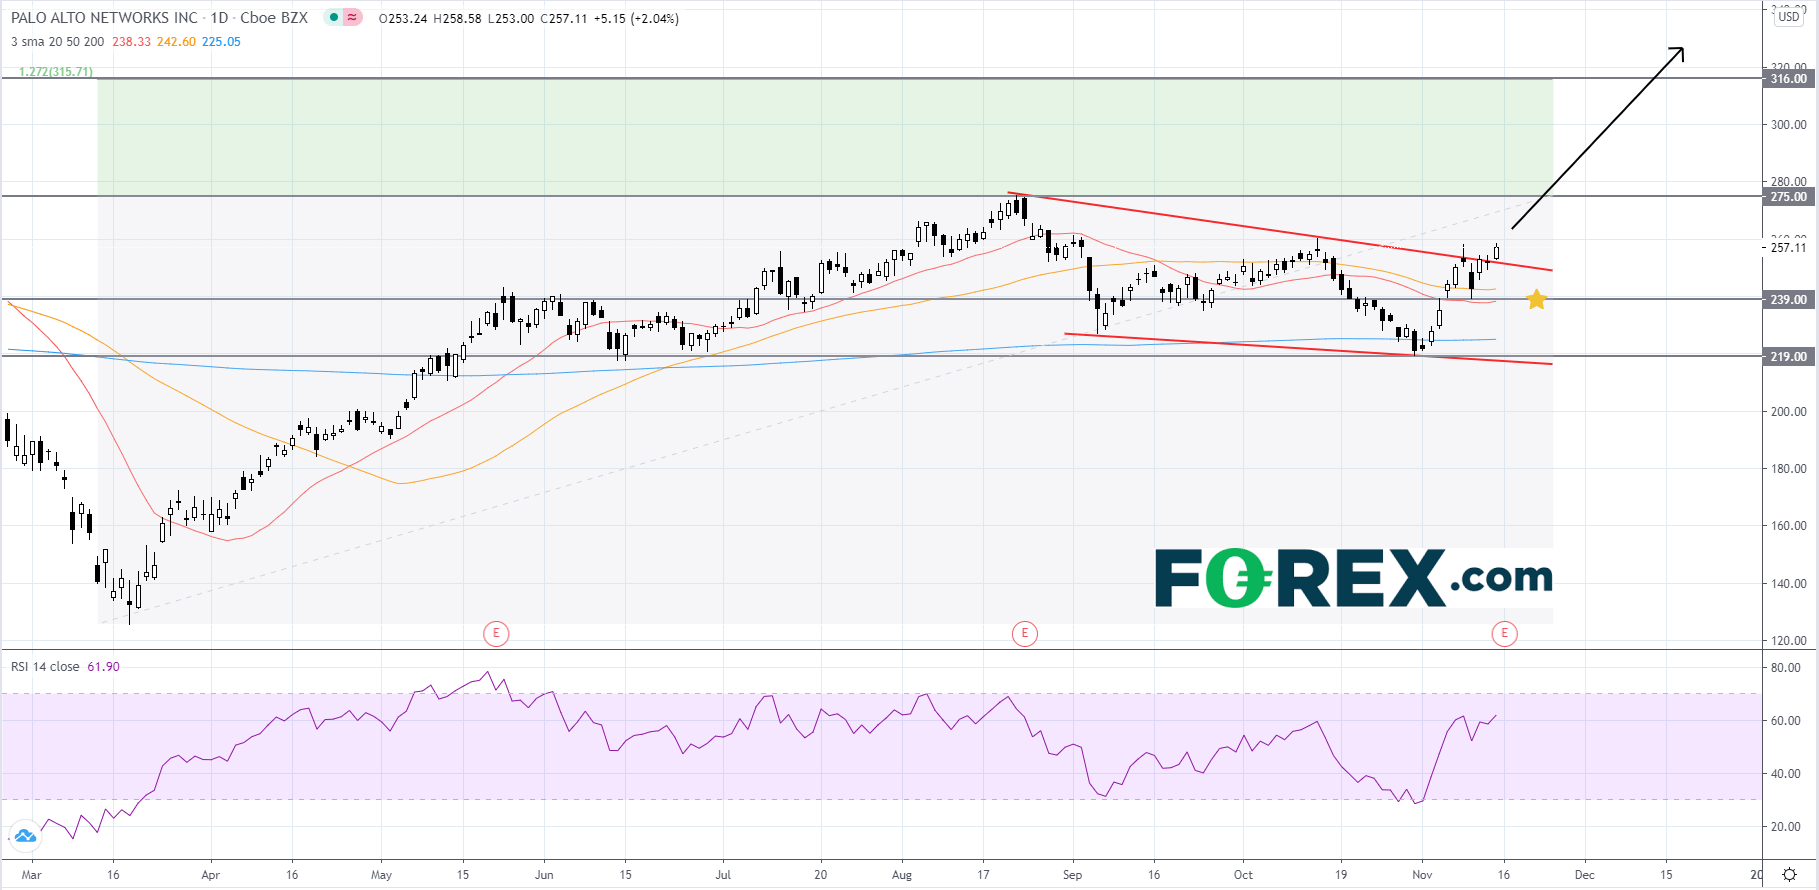 Chart analysis of Palo Alto Networks stock. Published in November 2020 by FOREX.com